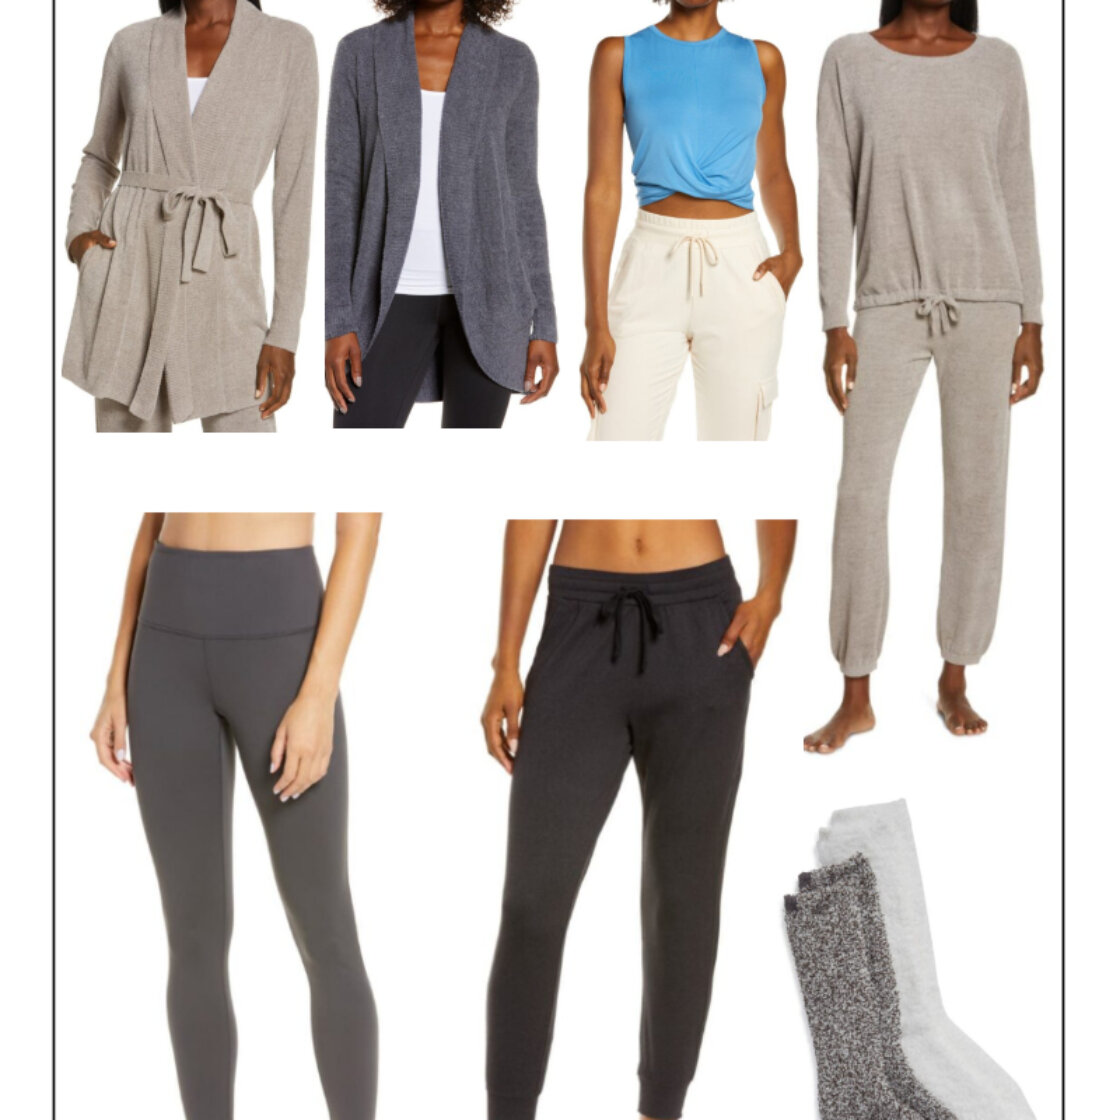 11 Comfy Loungewear Pieces From Nordstrom Anniversary Sale 2021 We’re Sold Over